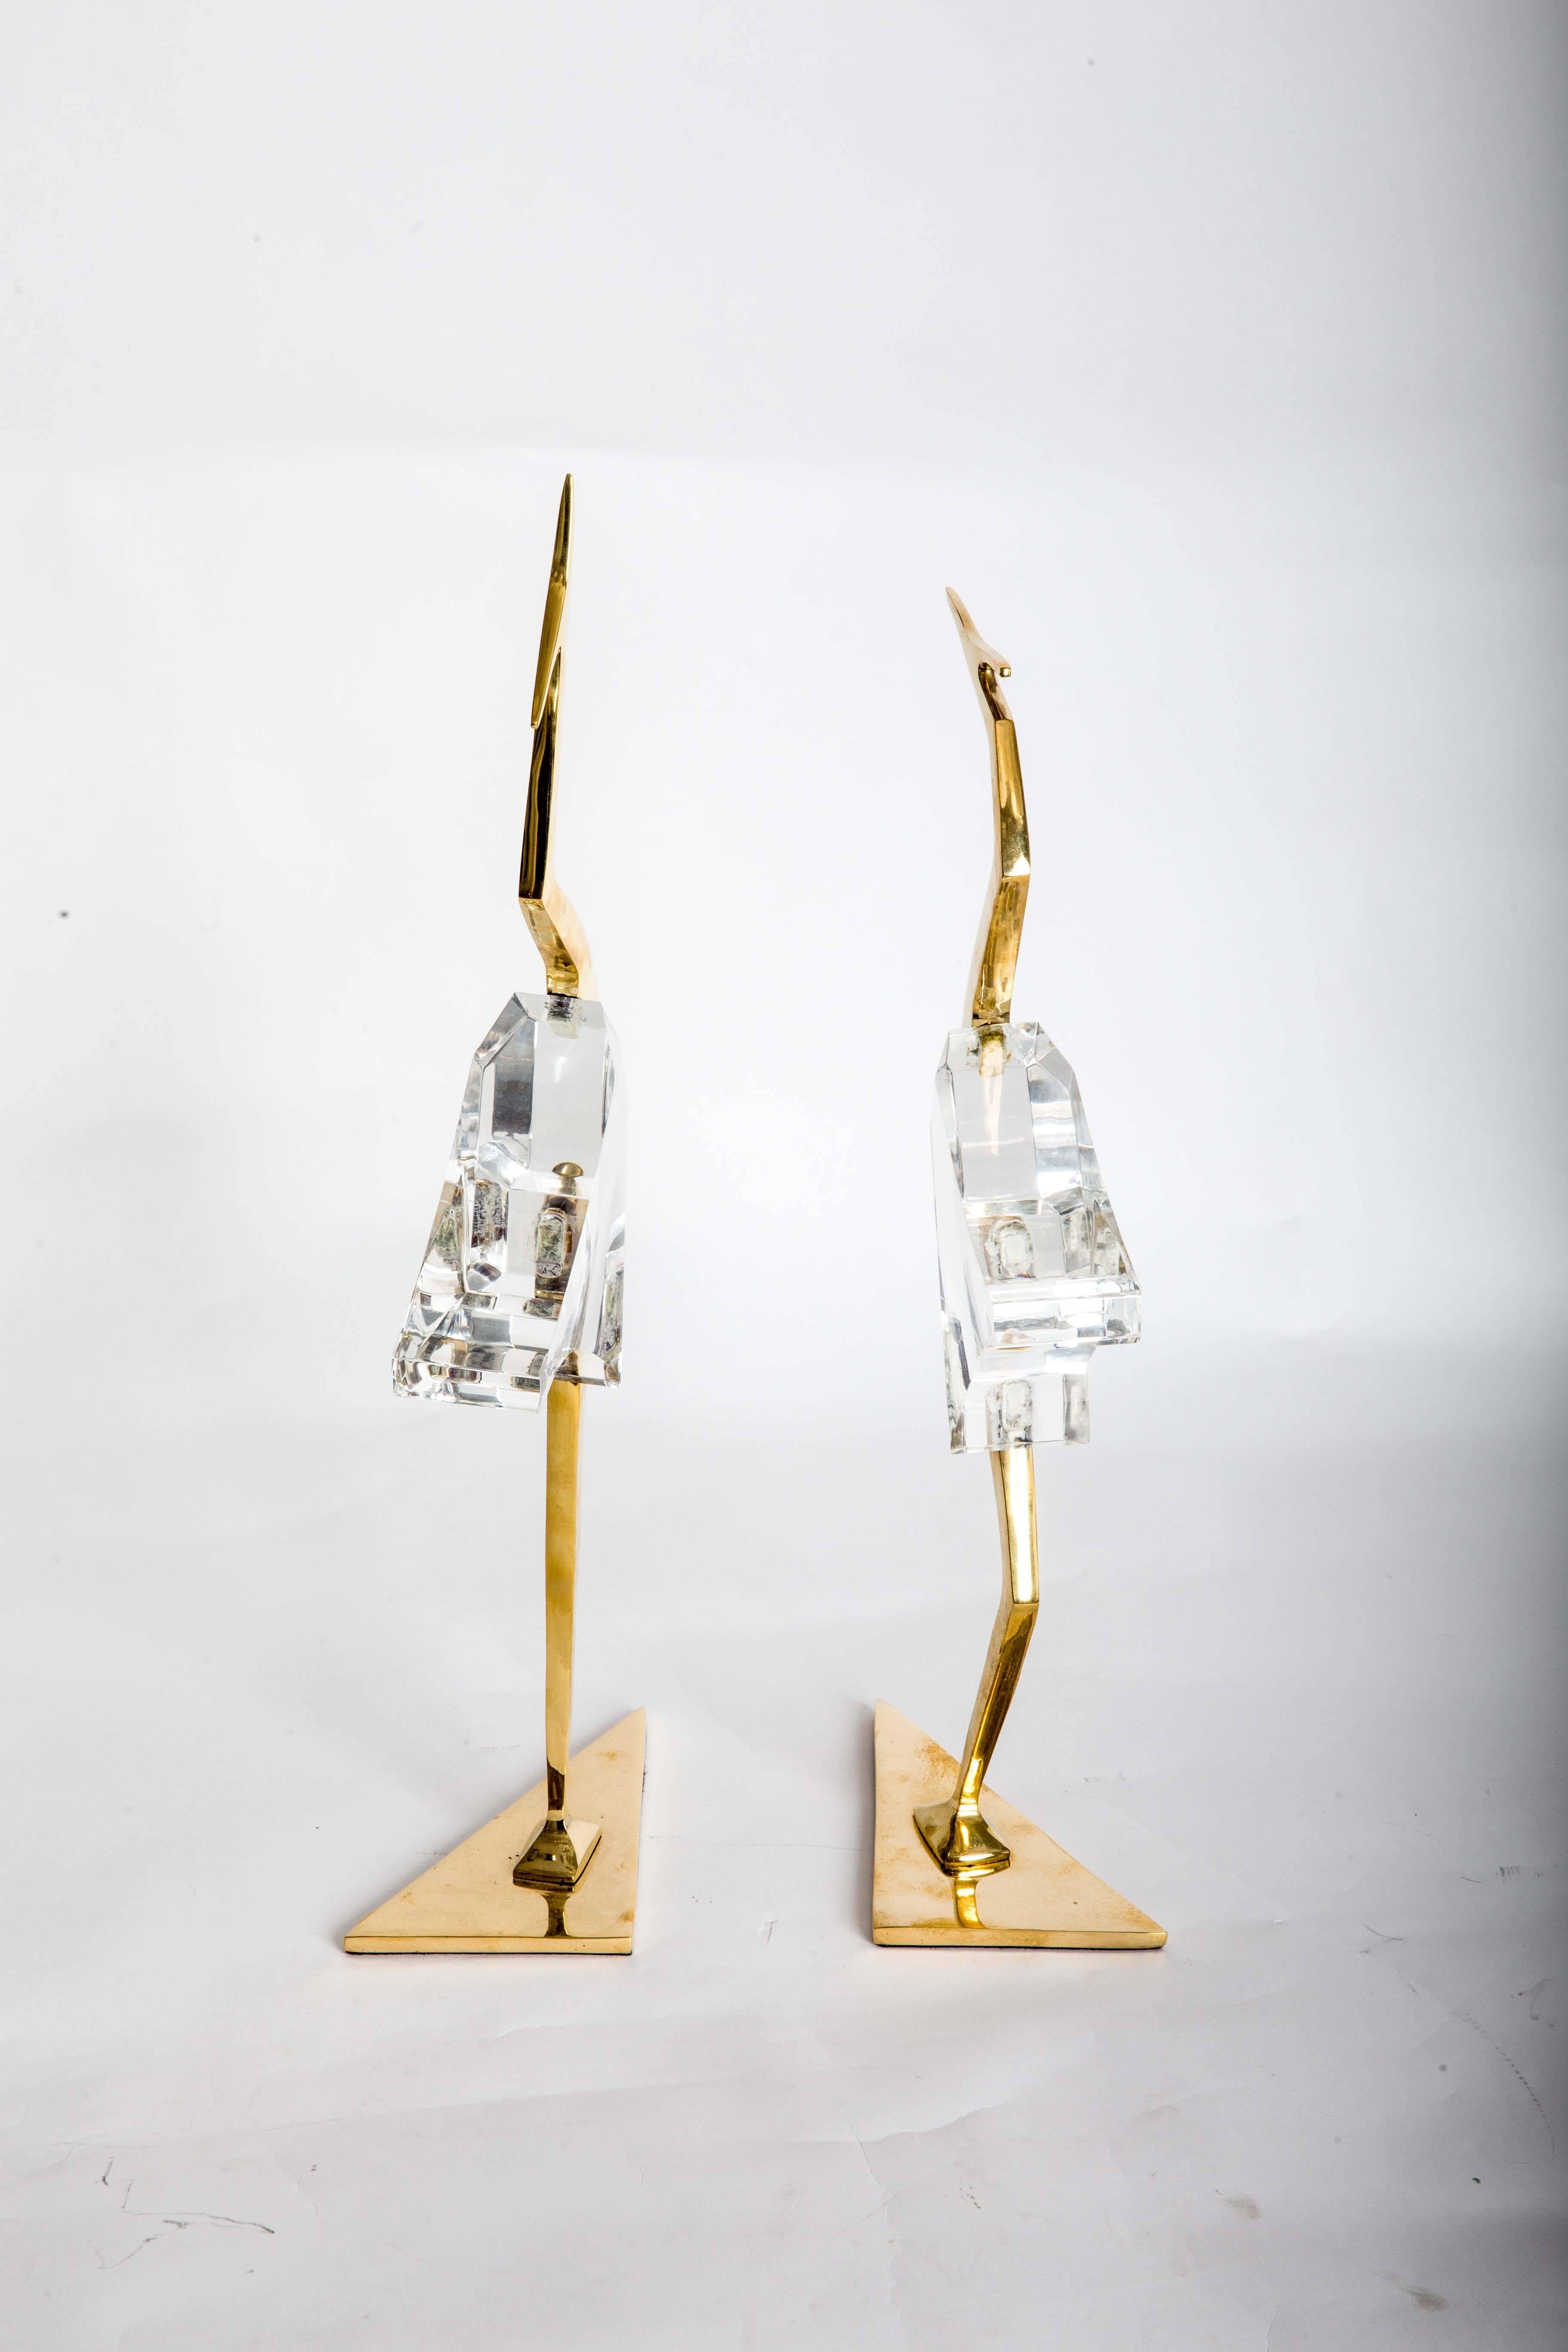 20th Century Pair of Stylized Lucite and Brass Crane Sculptures